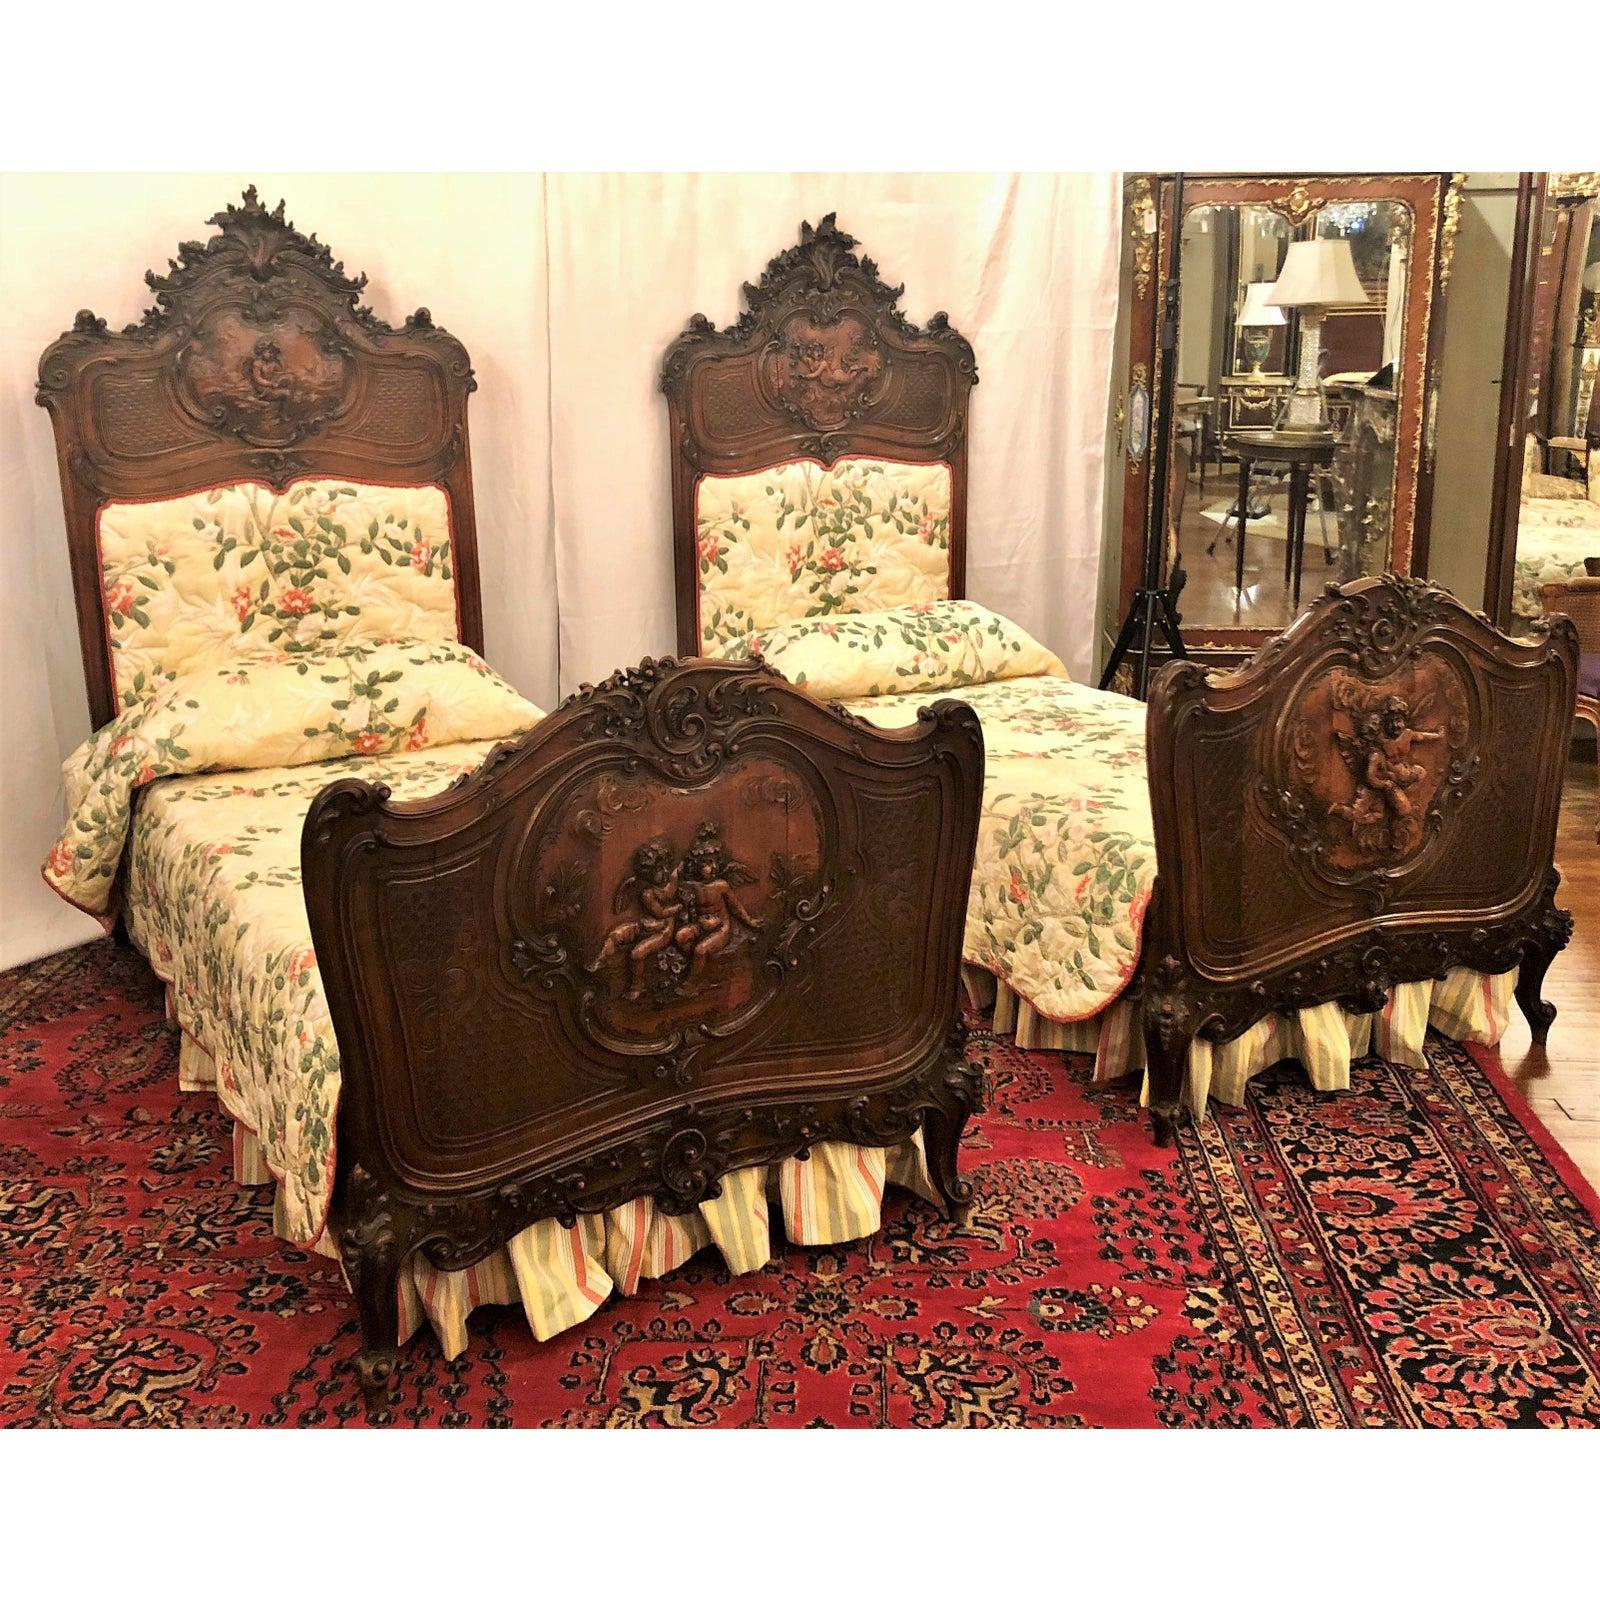 Pair of antique 19th century French walnut beds.